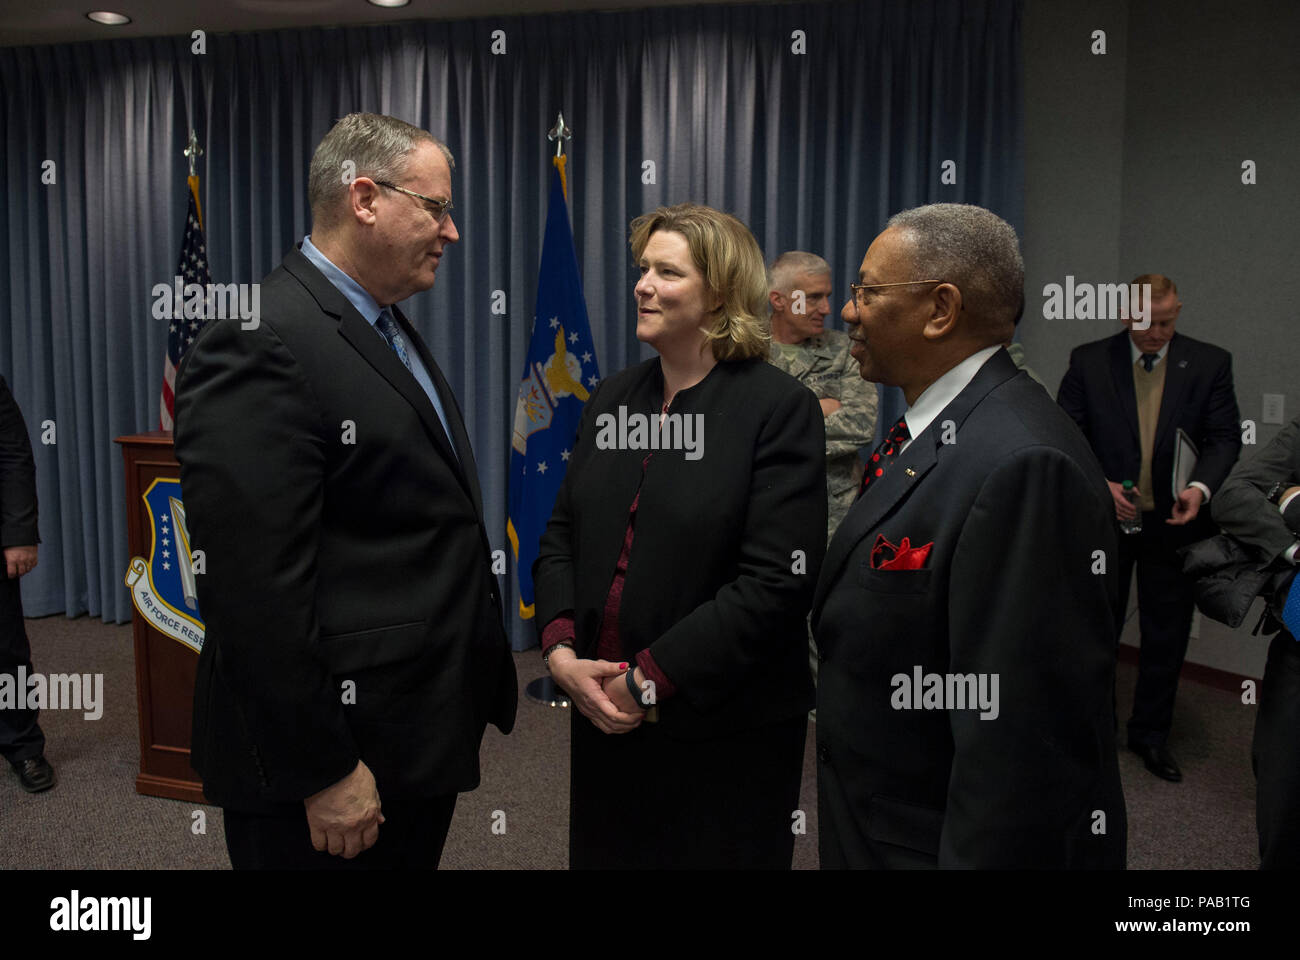 Deputy Secretary of Defense Bob Work speaks with City of Dayton Mayor Nan Whaley (center) after speaking to a group of students from the local Dayton, Ohio, area during 'Week at the Labs' event at Wright-Patterson Air Force Base, Ohio, March 3, 2016. (Photo by Senior Master Sgt. Adrian Cadiz/Released) Stock Photo